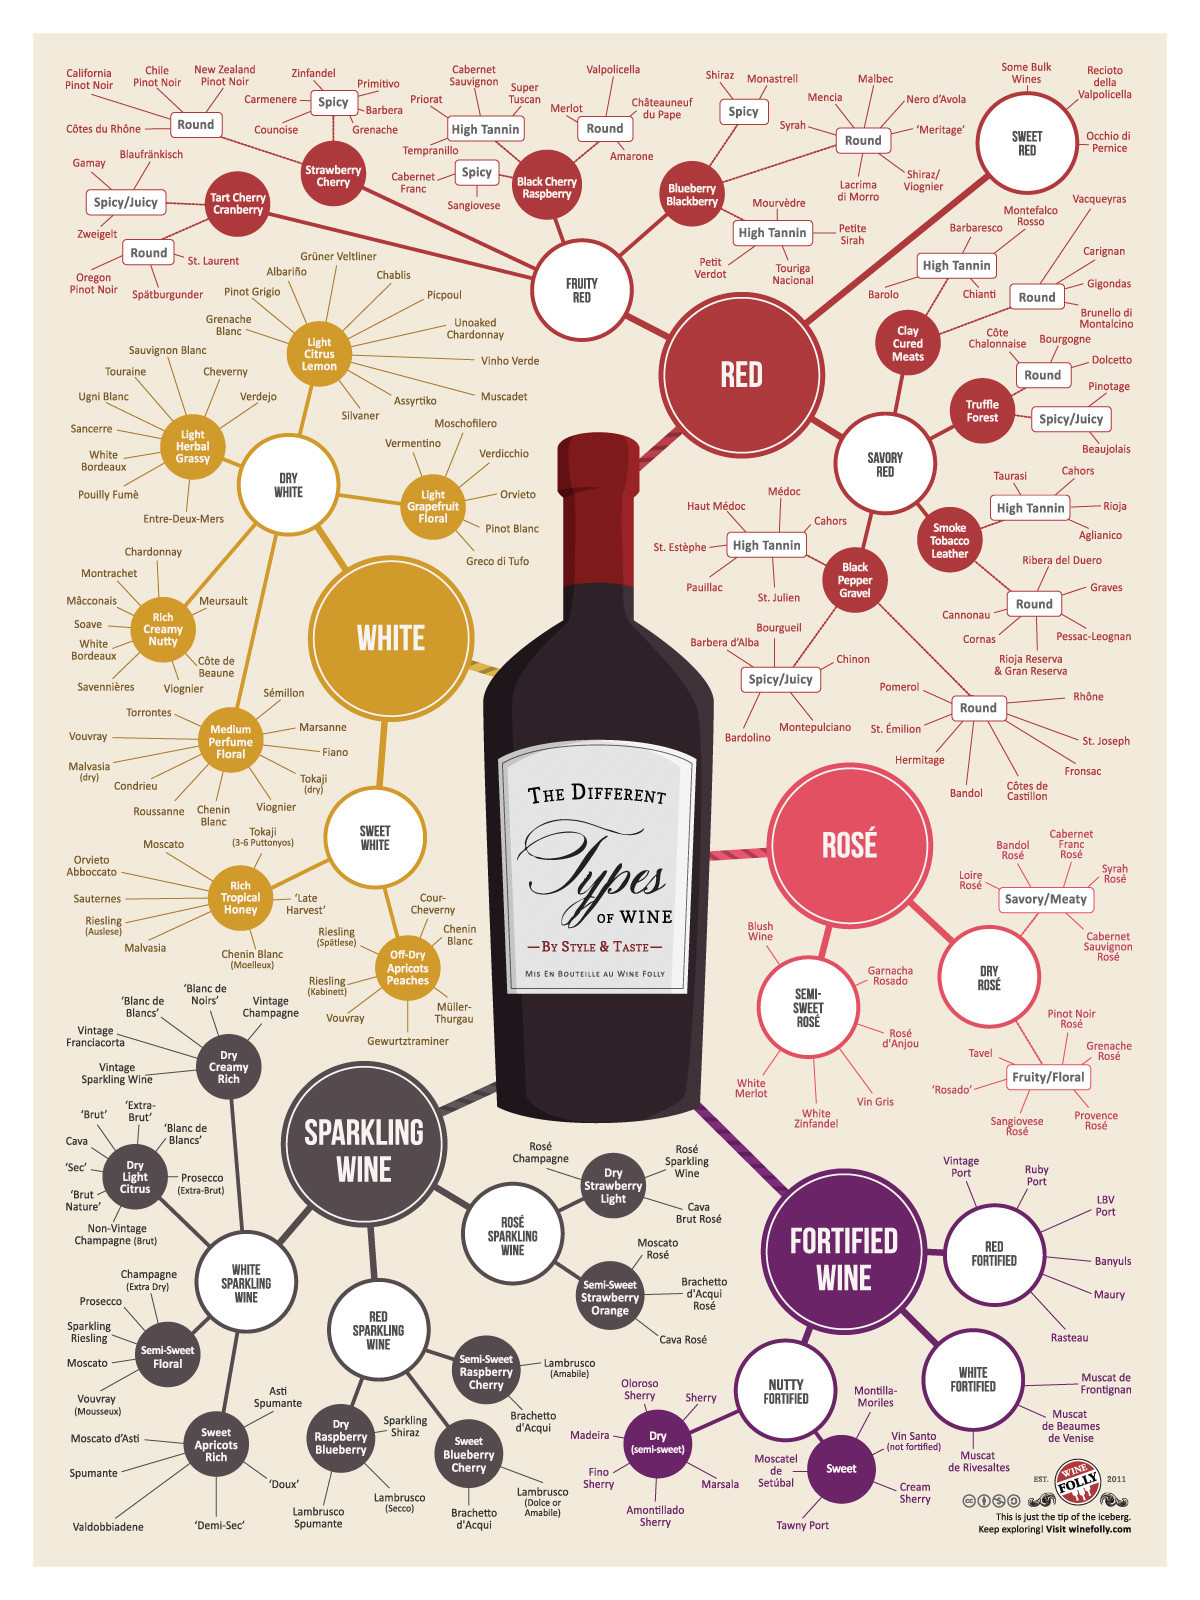 Wine Differences Chart